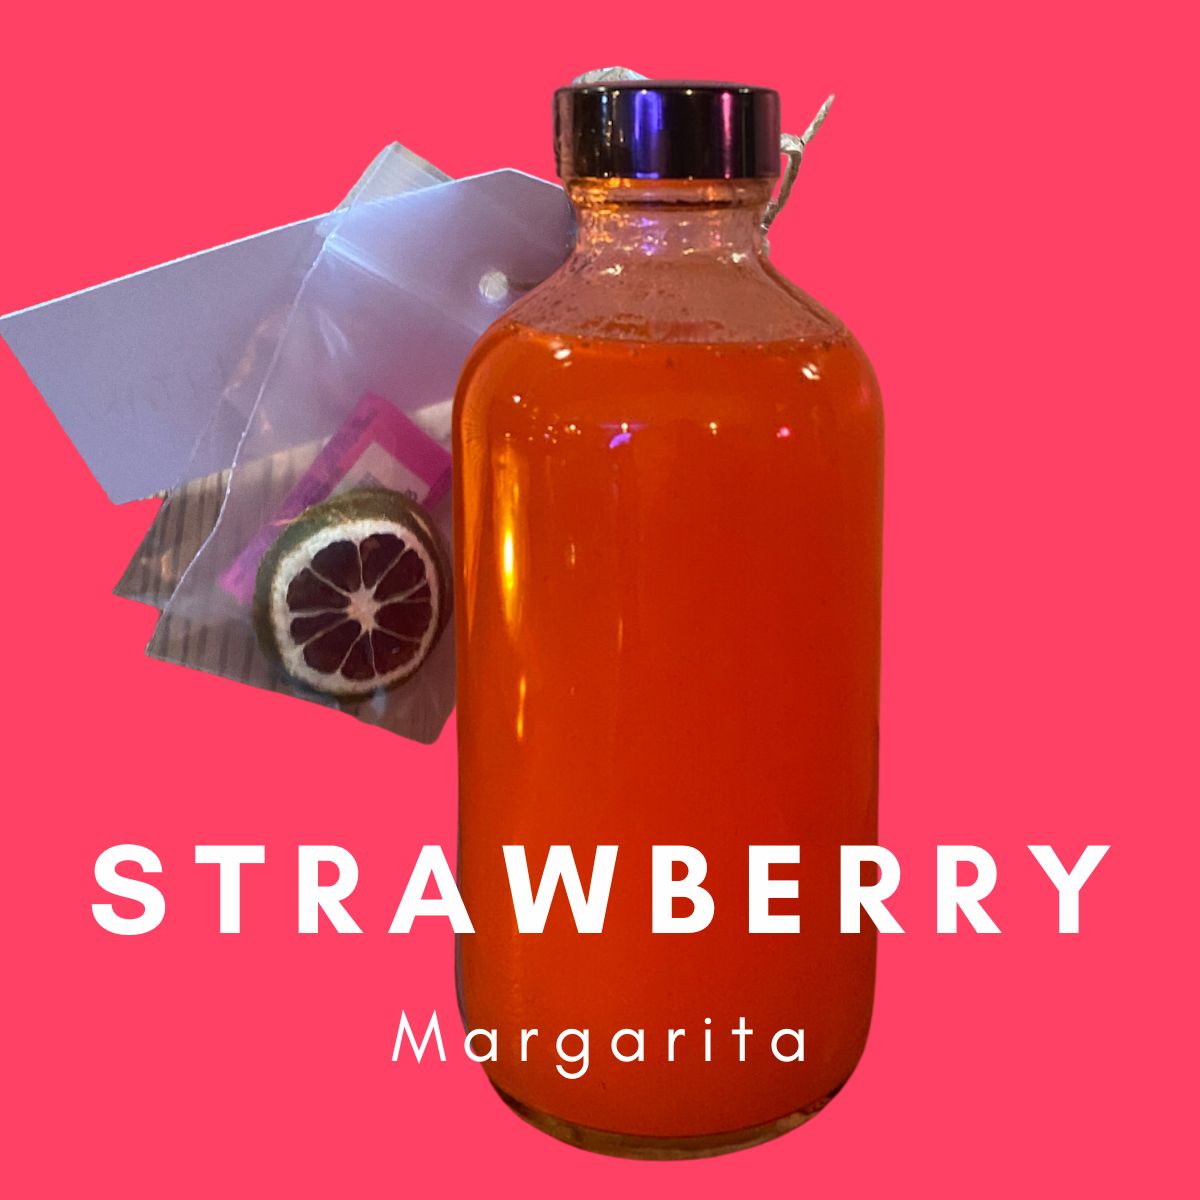 A vibrant pink Strawberry Margarita RTD Cocktail Gift Box from Super Bargain Shop in a transparent bottle against a pink background, with the label "RTD STRAWBERRY Margarita" displayed prominently. A sliced lime and a small bag of spices are next to the bottle.